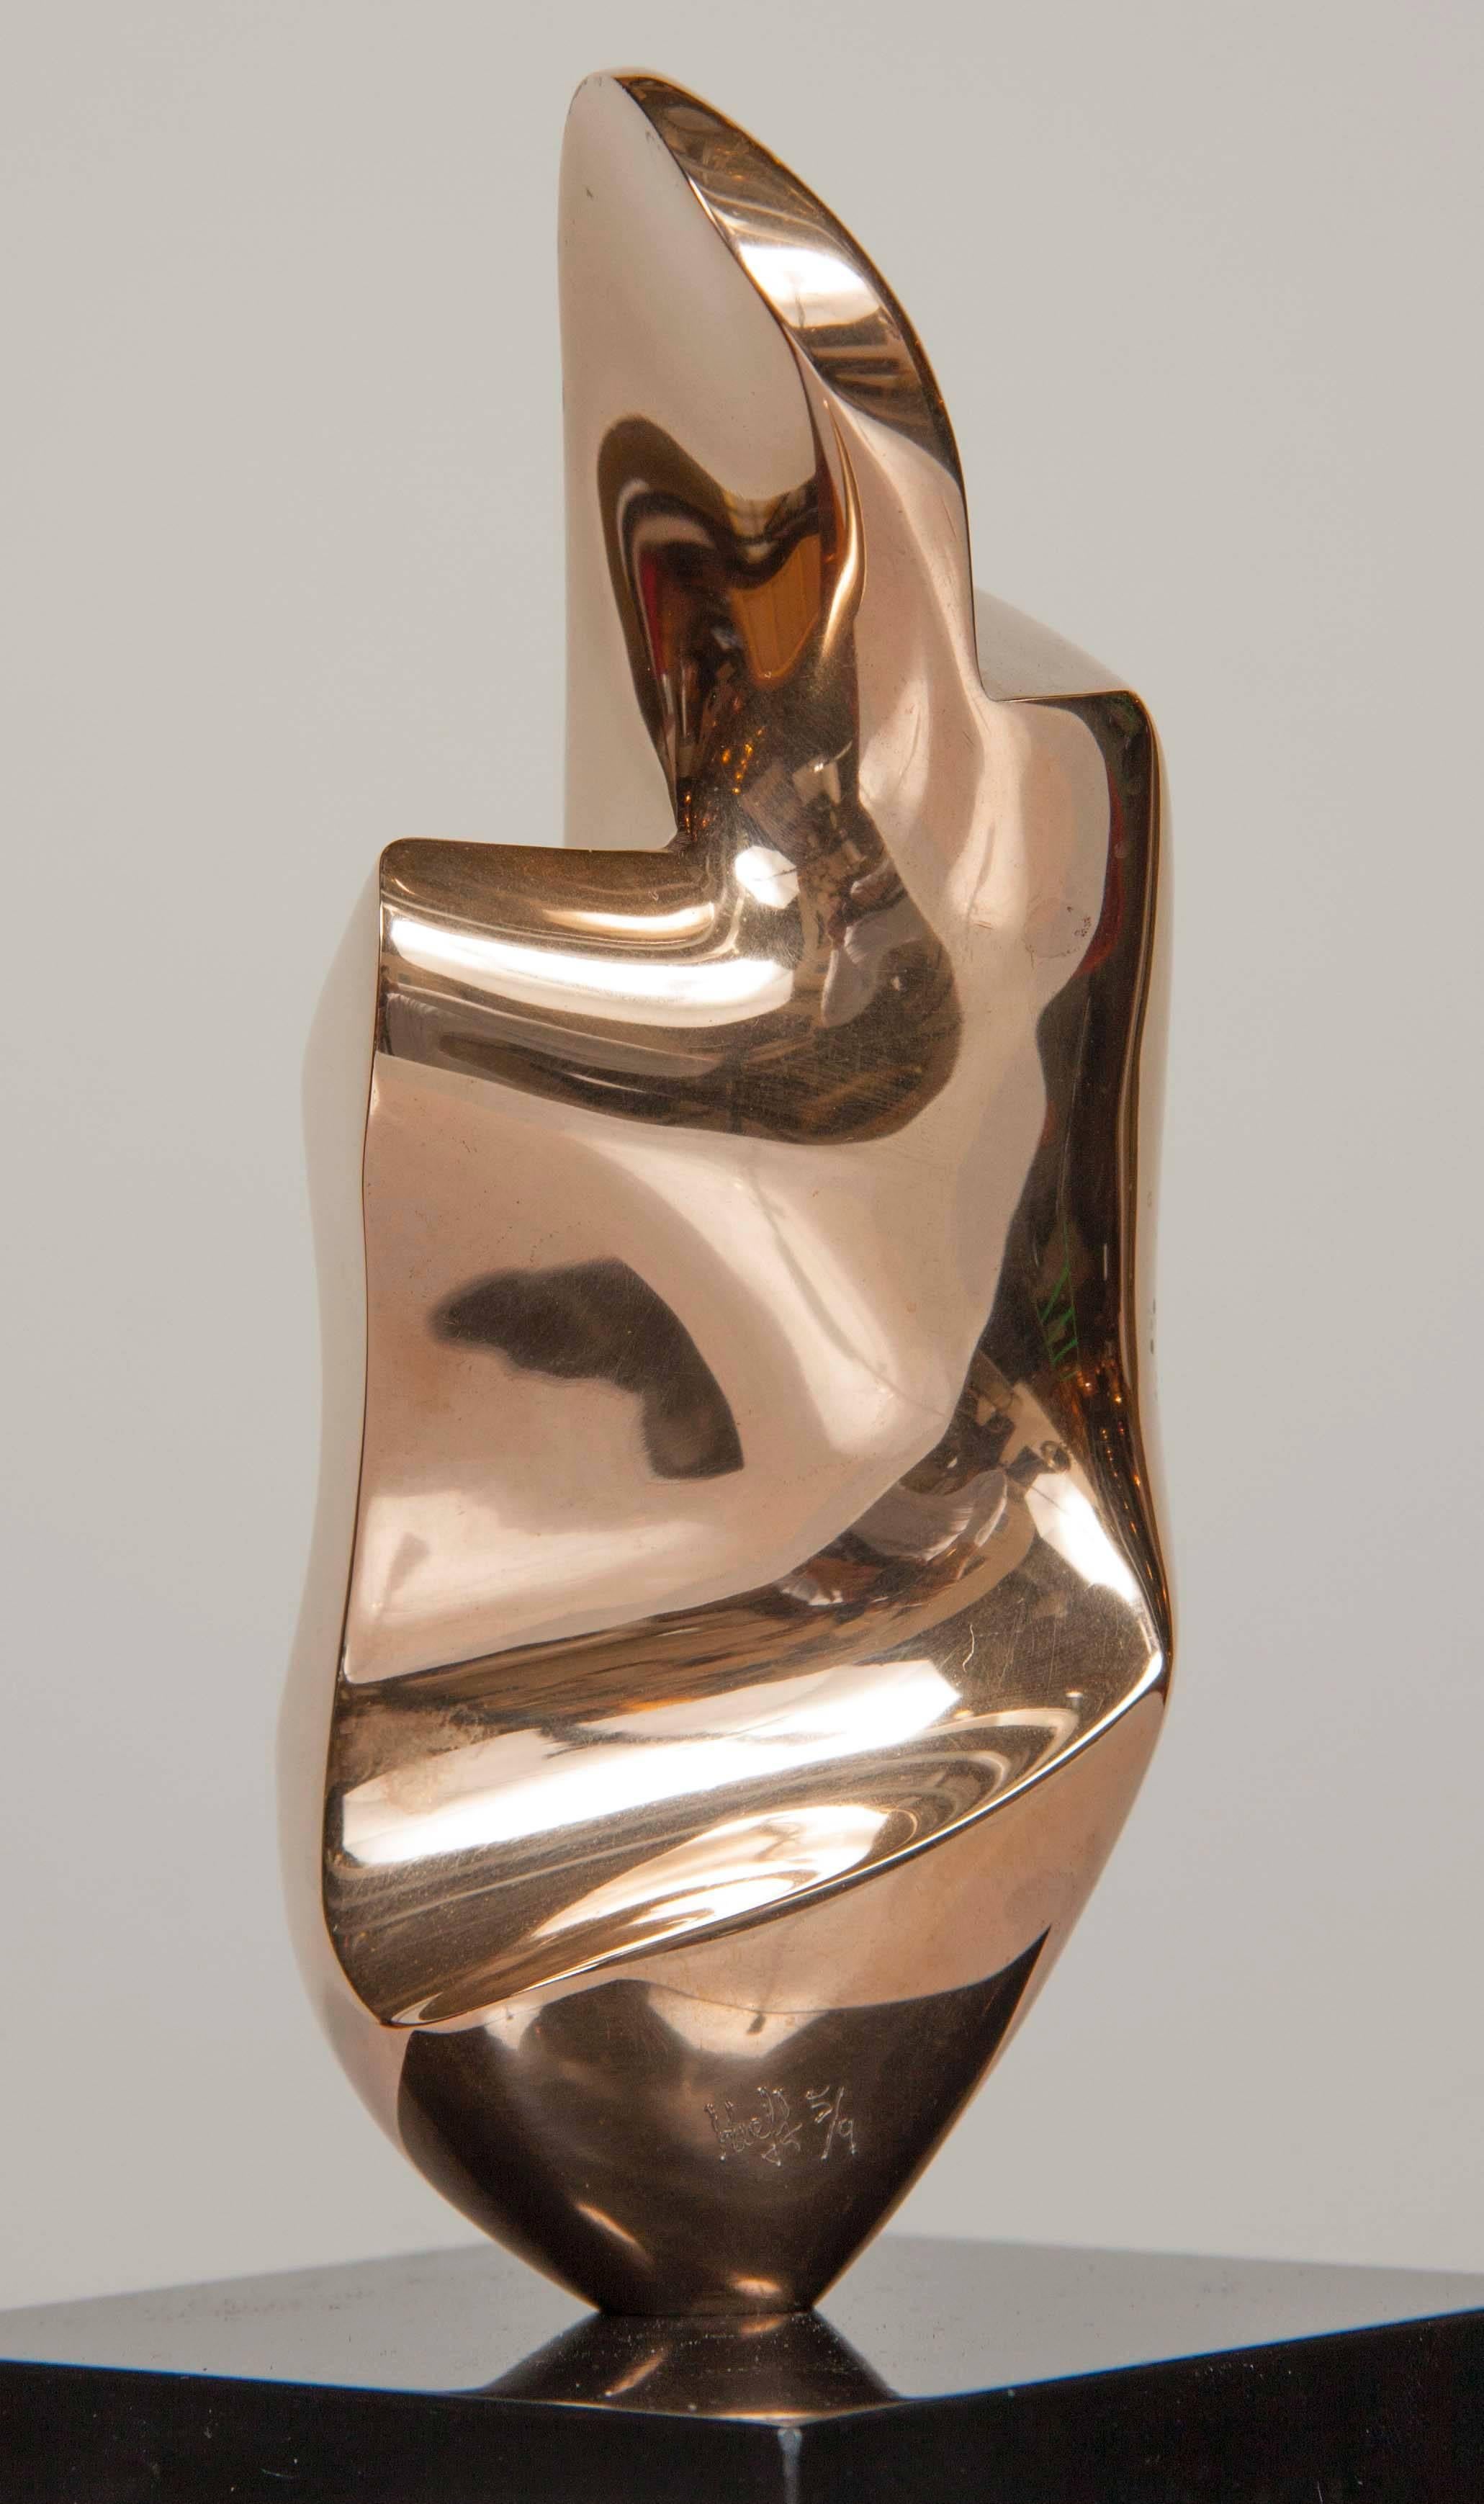 Canadian Bronze Abstract Sculpture by Antonio Grediaga Kieff, Signed and Numbered 5/9